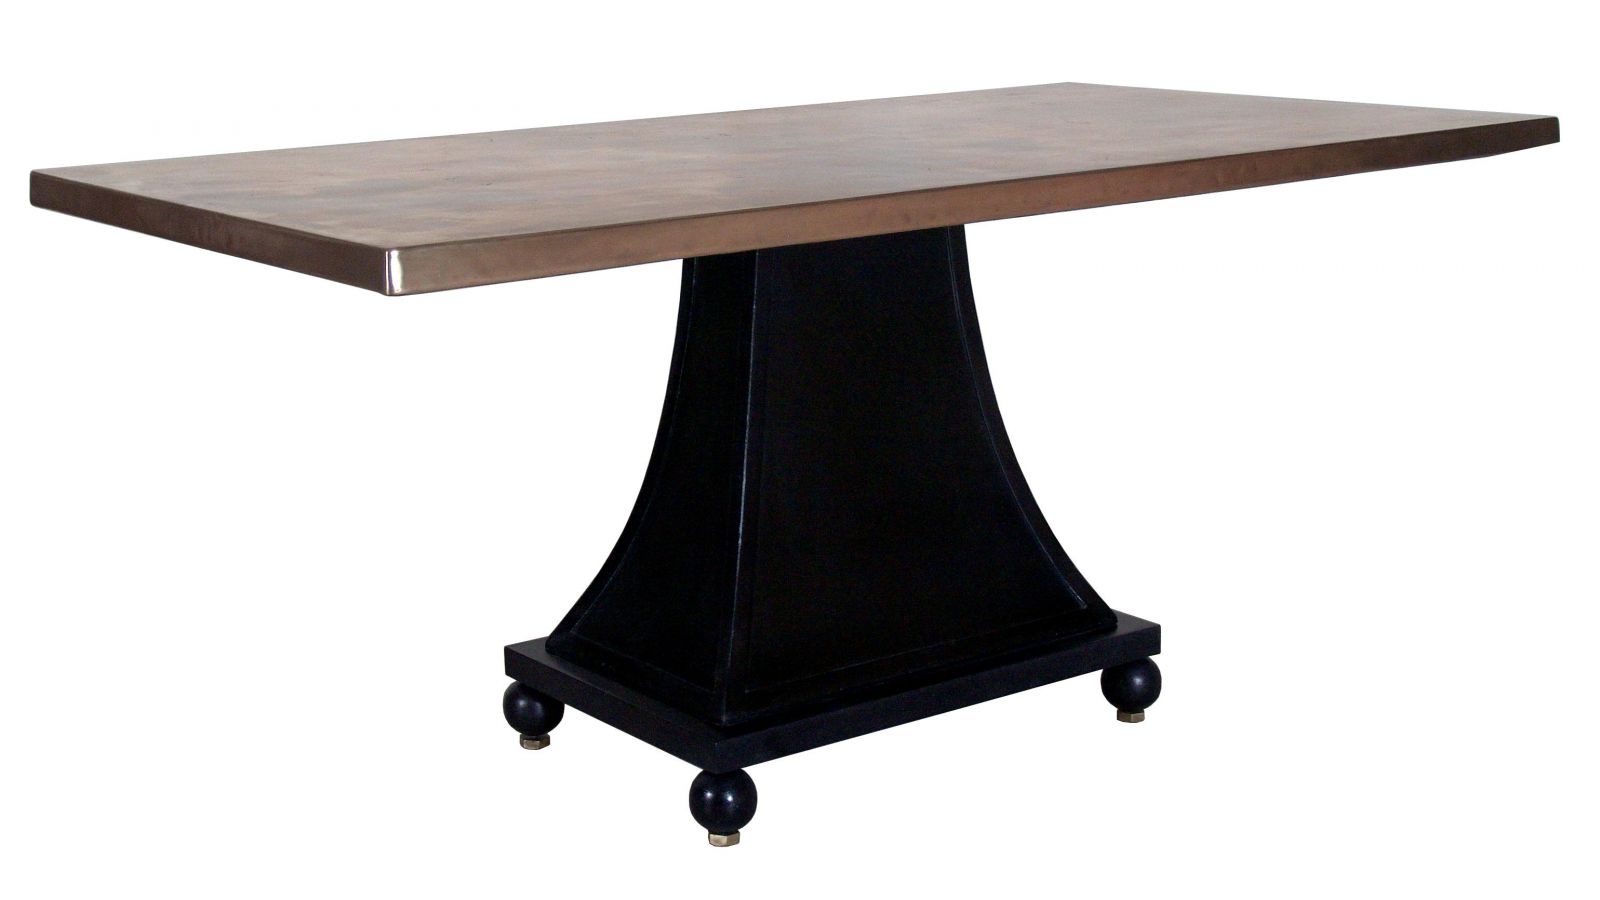 DT70107 Rivoli Dining Table with Copper Top (Large)